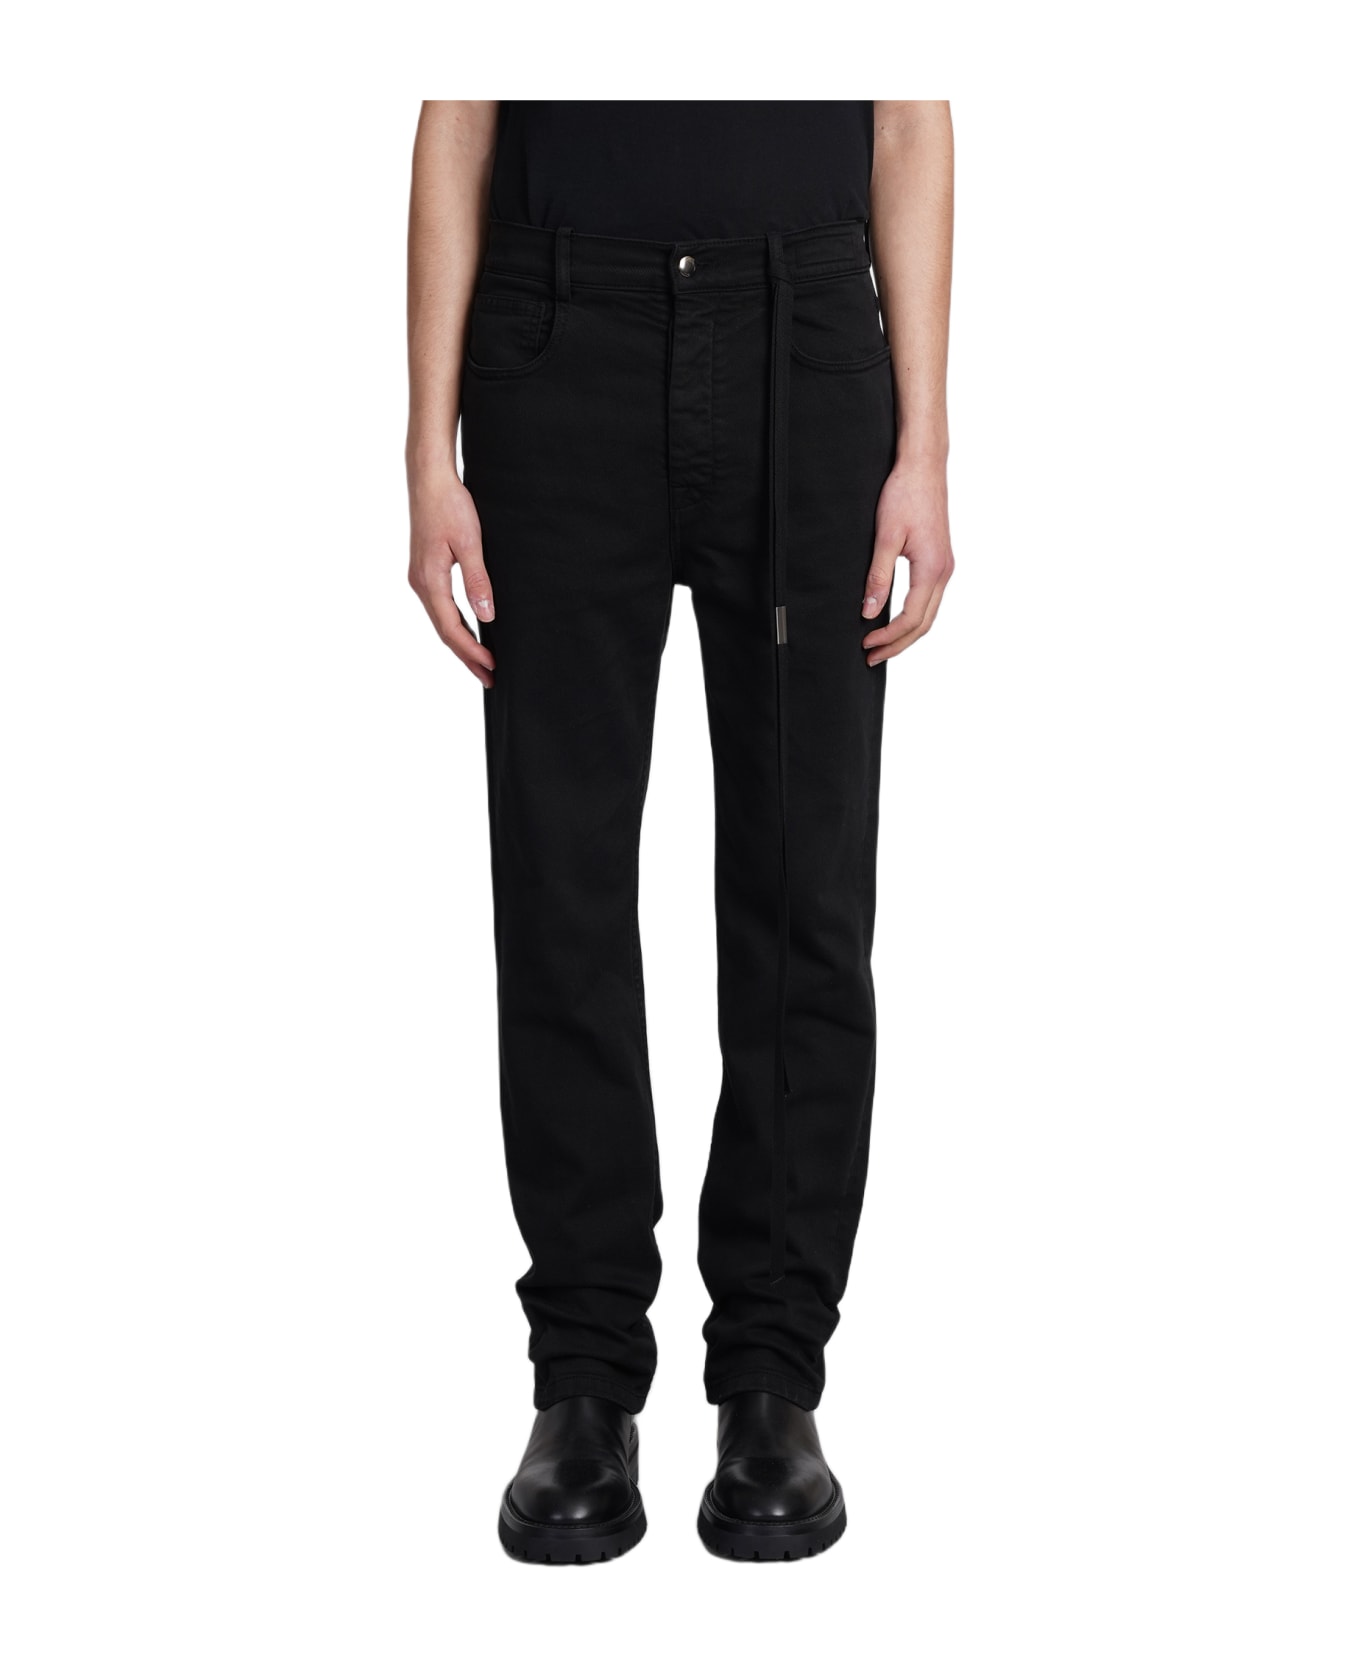 Ann Demeulemeester Jeans In Black Cotton - black ボトムス